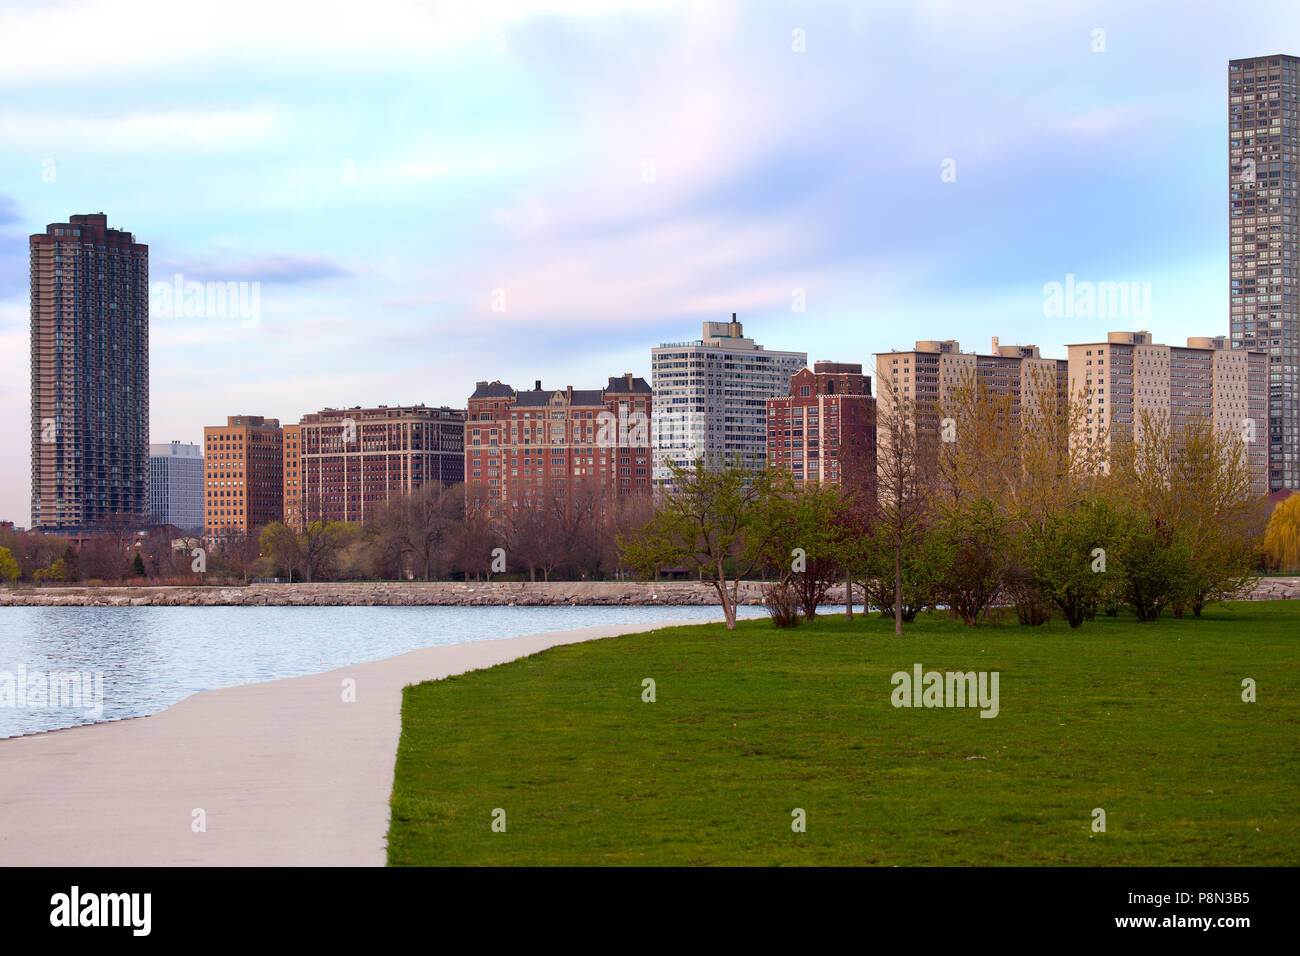 Residential buildings at Montrose, Montrose Harbor, Lincoln Park, Chicago, Illinois, USA Stock Photo